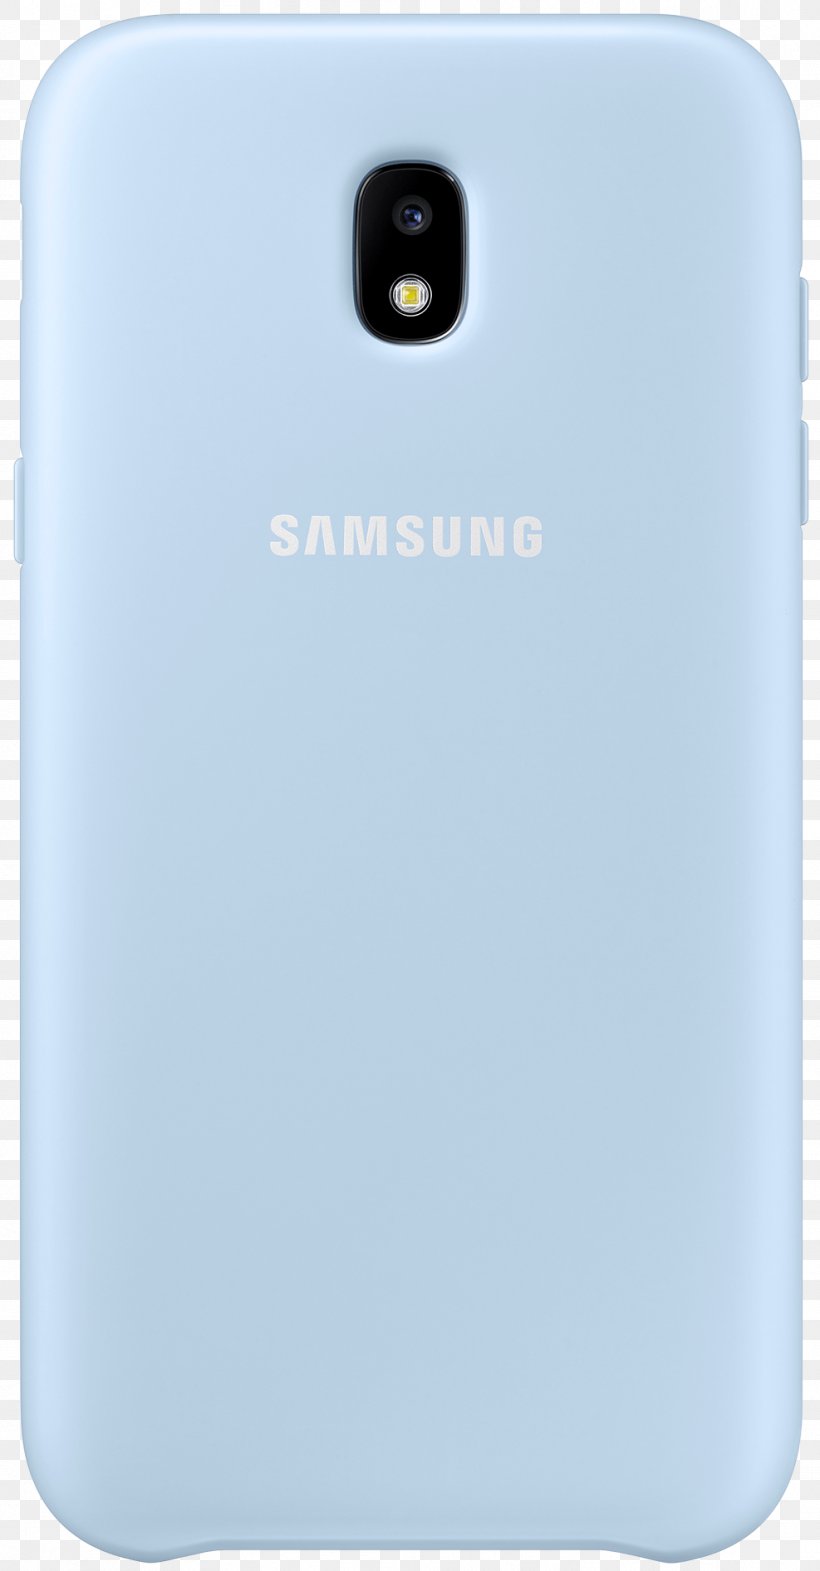 Smartphone Samsung Galaxy J7 Samsung Galaxy J5 Vodafone, PNG, 987x1891px, Smartphone, Blue, Communication Device, Electric Blue, Electronic Device Download Free